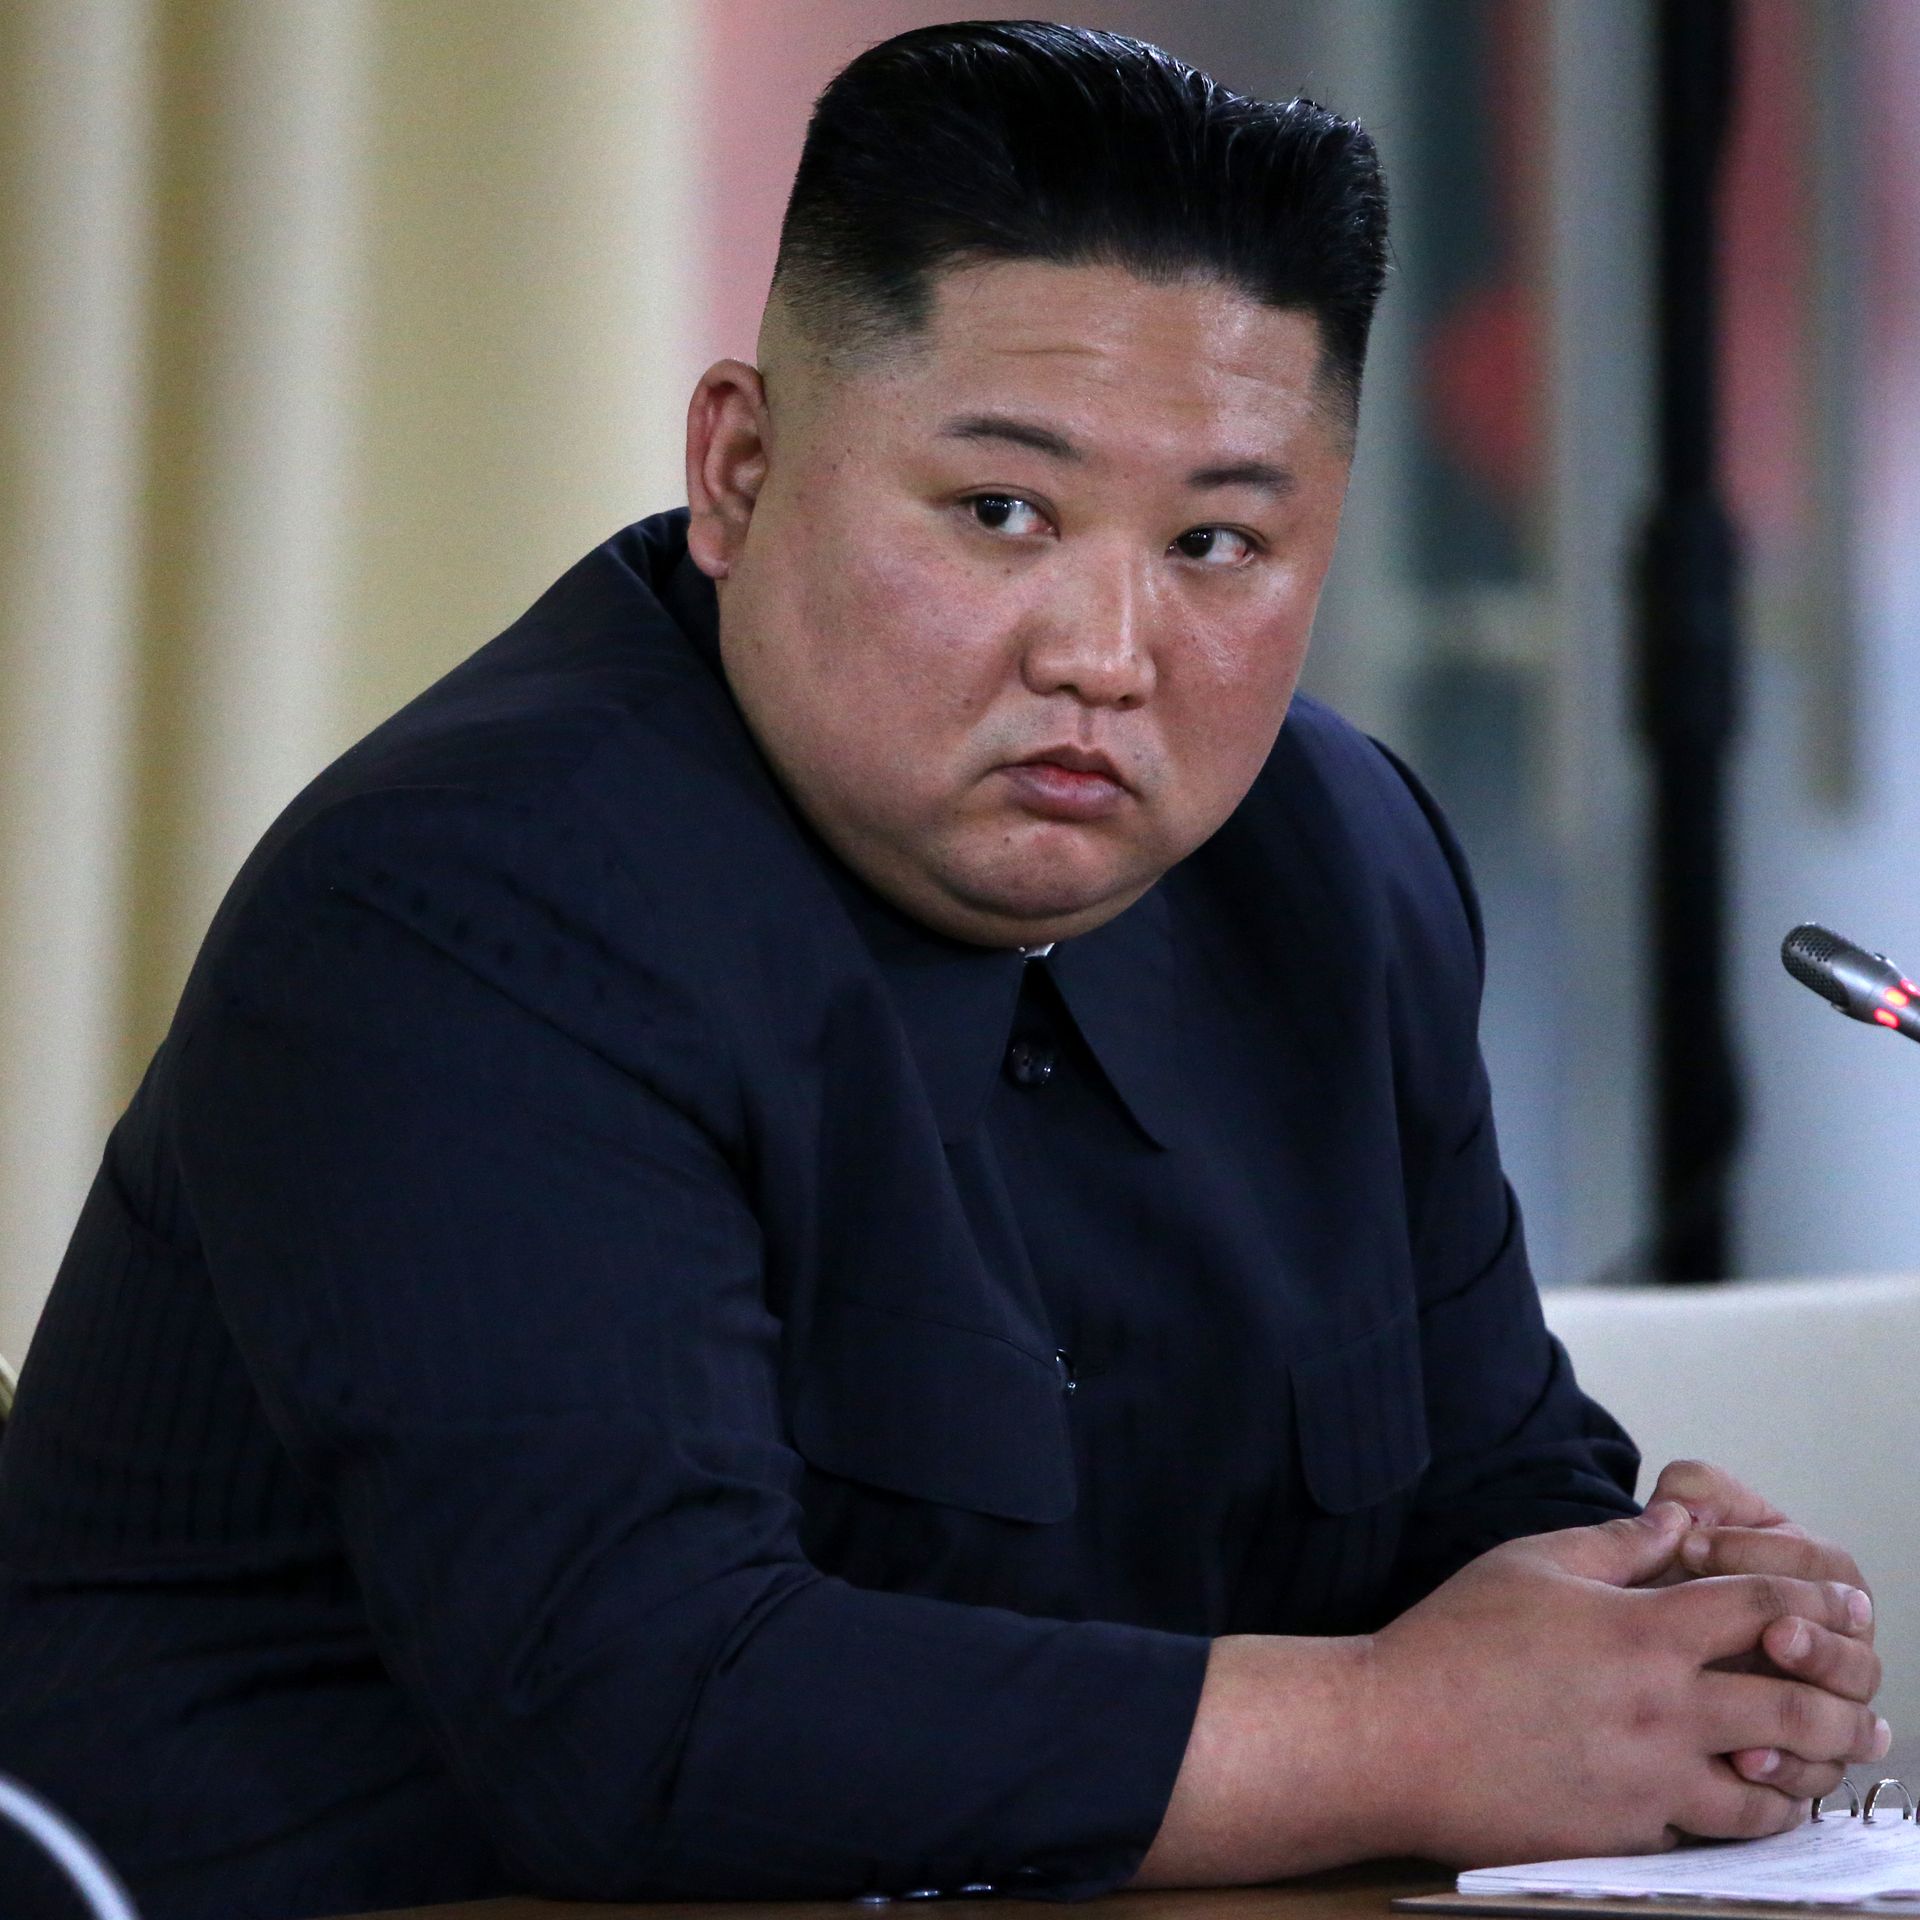 This image shows Kim John Un sitting in front of a microphone and looking to the left.